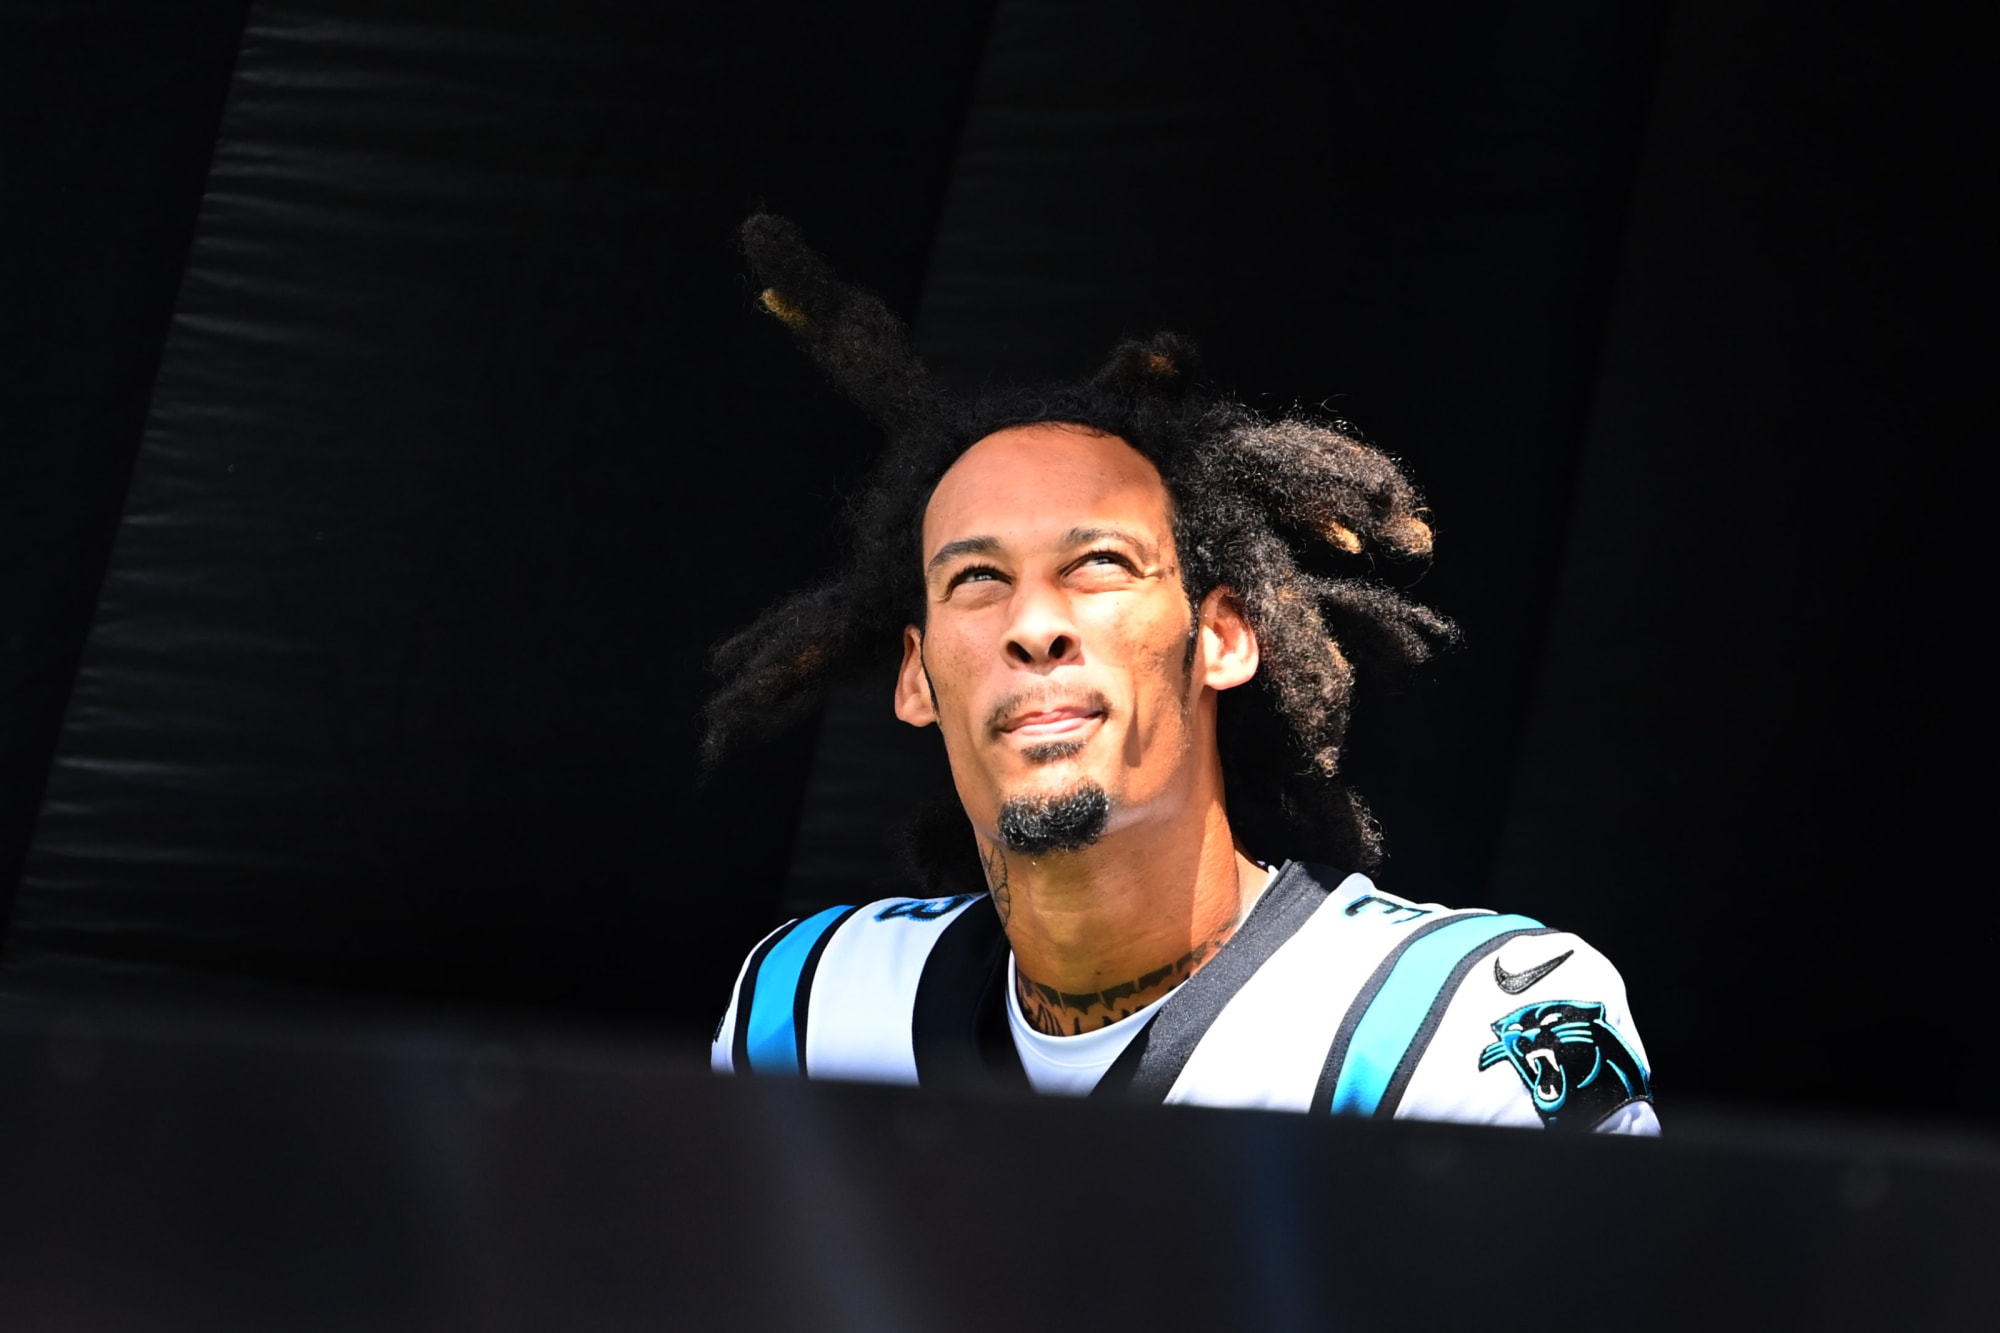 4 Panthers players that must respond positively in Week 3 vs. Saints